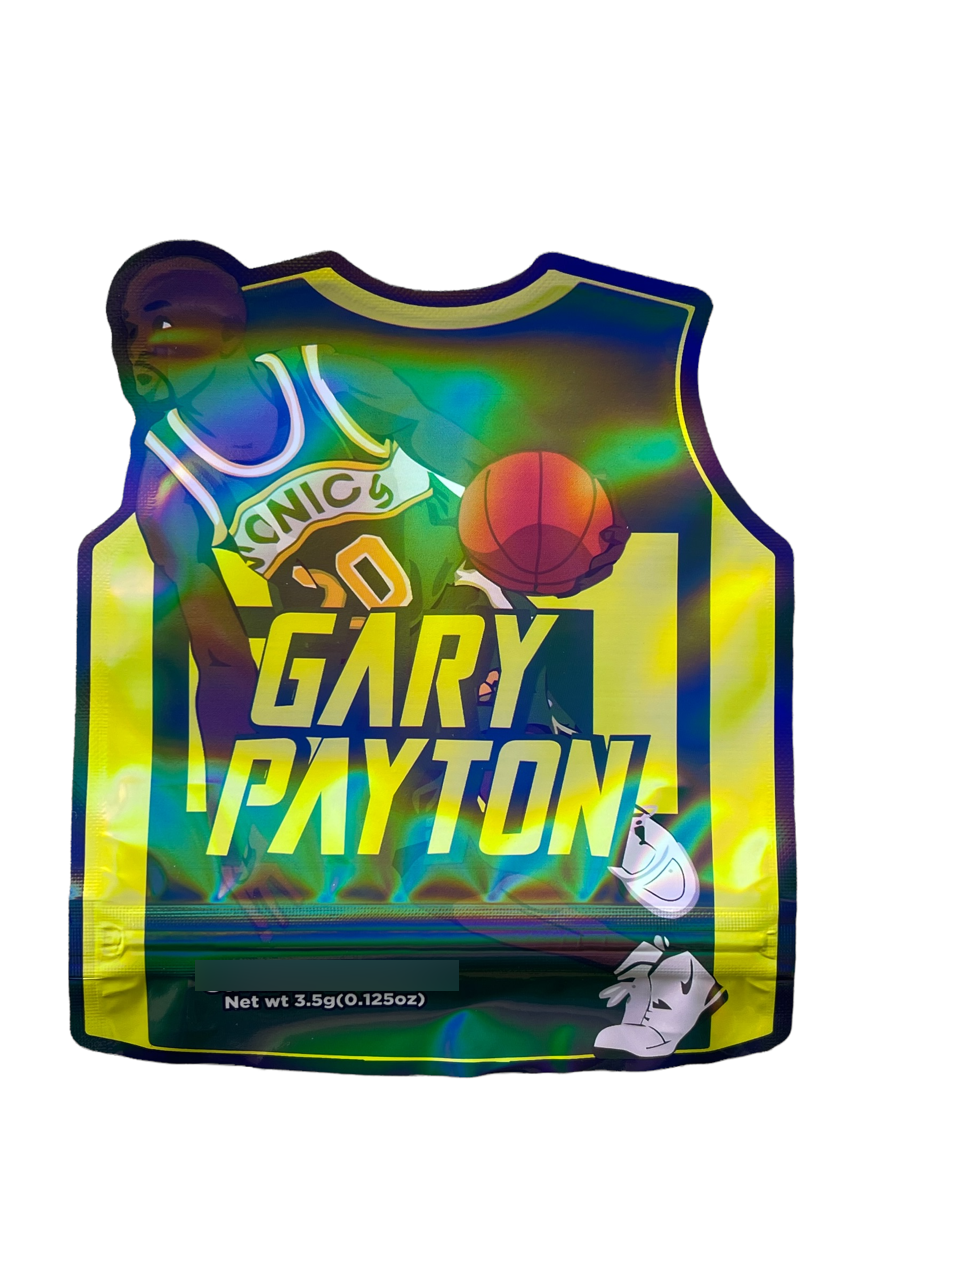 Gary Payton cut out Holographic Mylar bag 3.5g